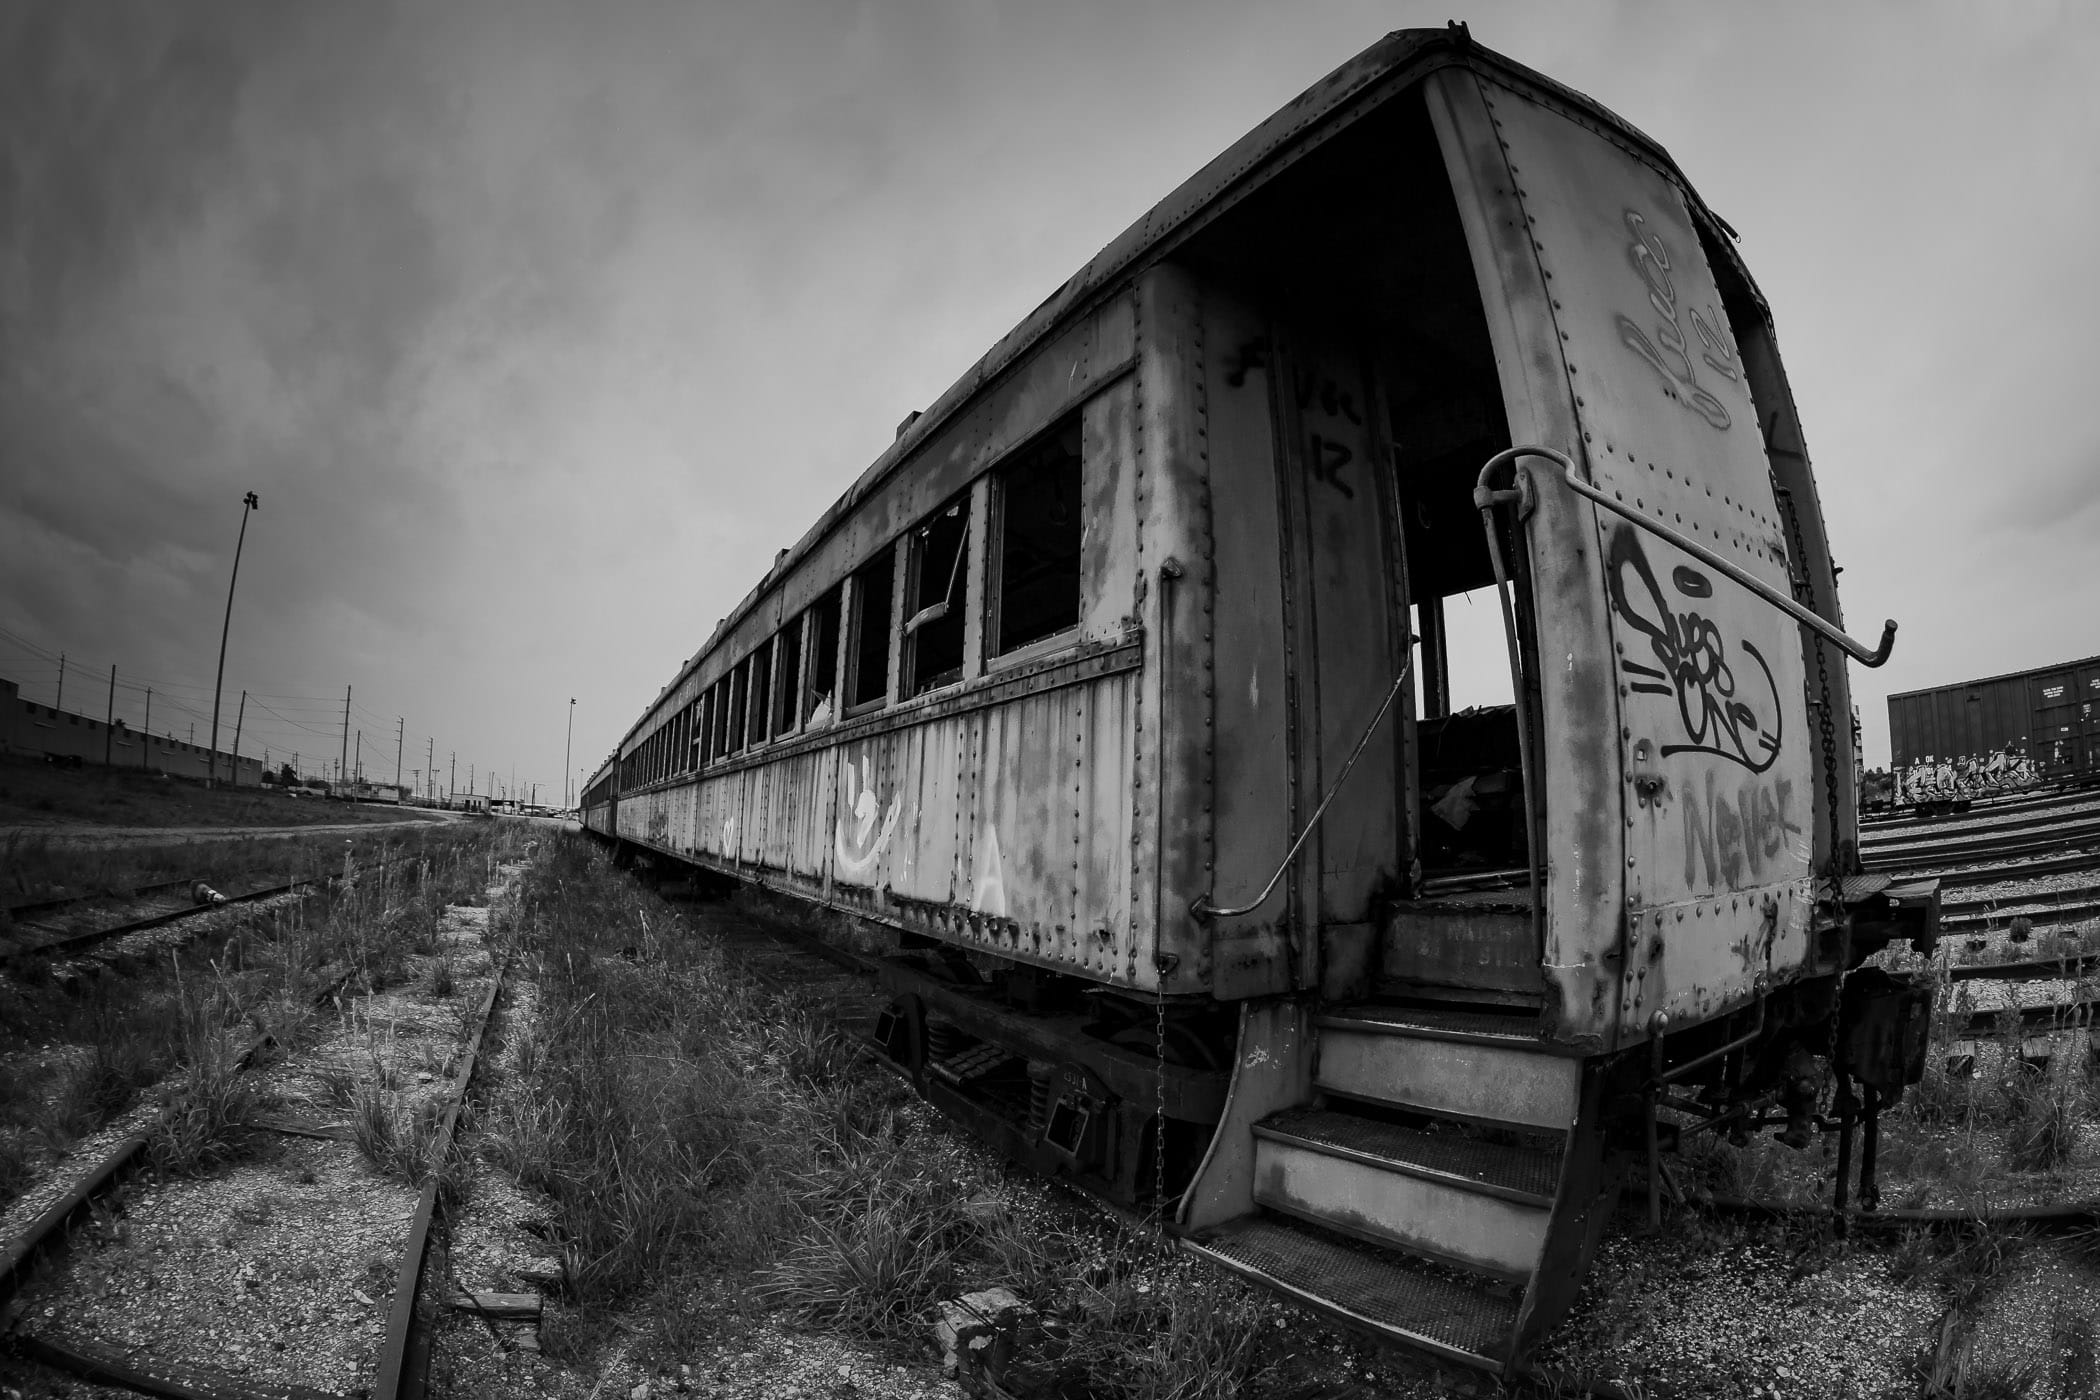 An abandoned railcar rusting in the Union Pacific rail yard at Galveston, Texas.